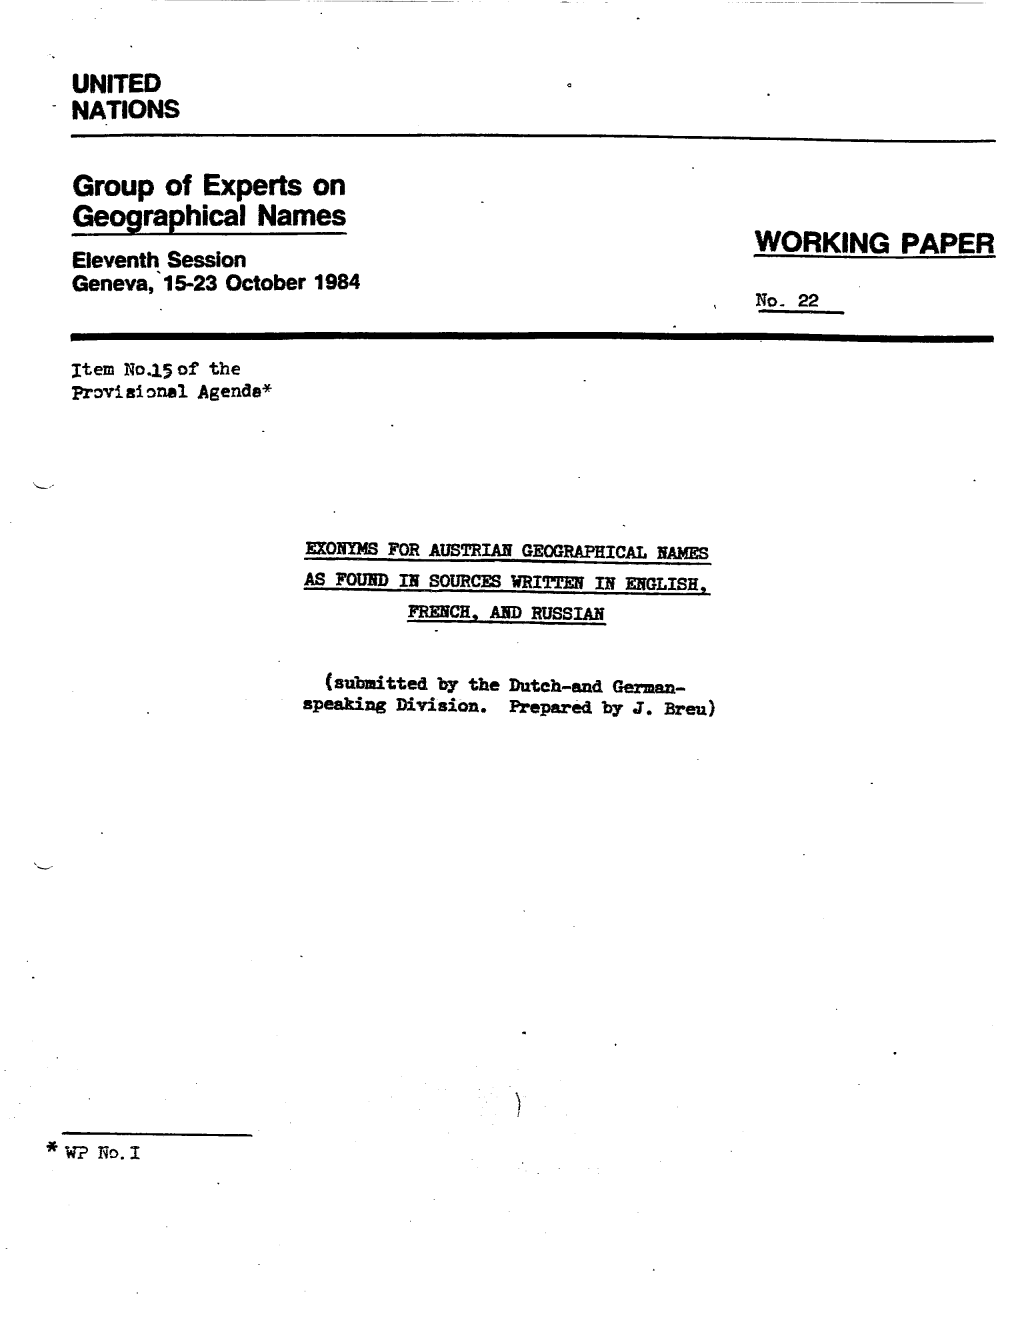 Group of Experts on Geographical Names Bevenm Sess.Cn WORKING PAPER Geneva, 15-23 October 1984 No